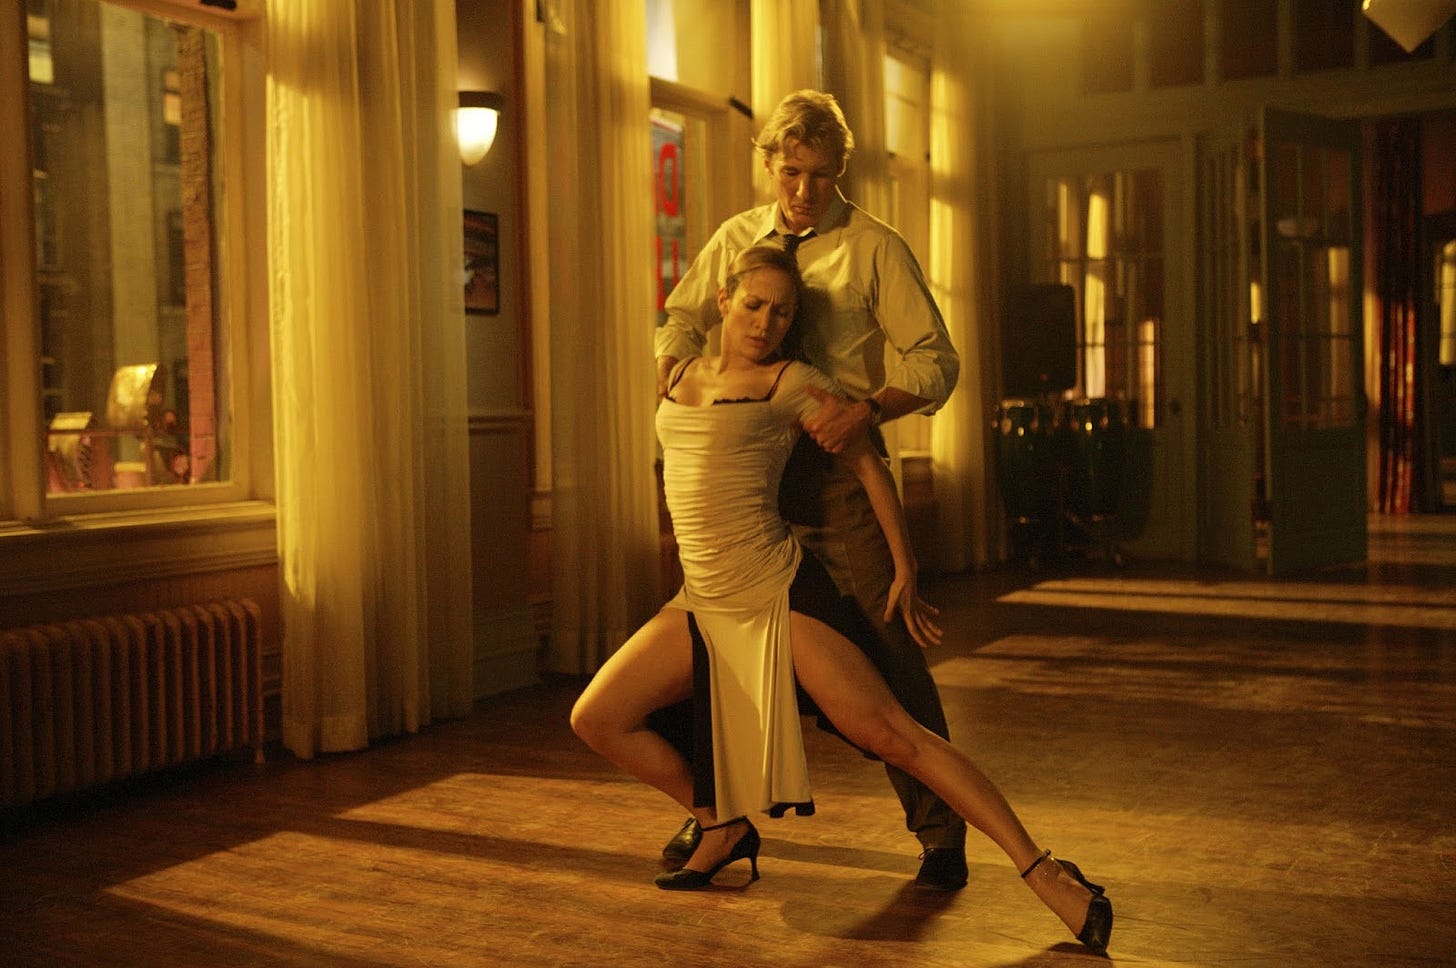 A white man, played by Richard Gere, dances seductively with a Latina woman, played by Jennifer Lopez, in an empty ballroom